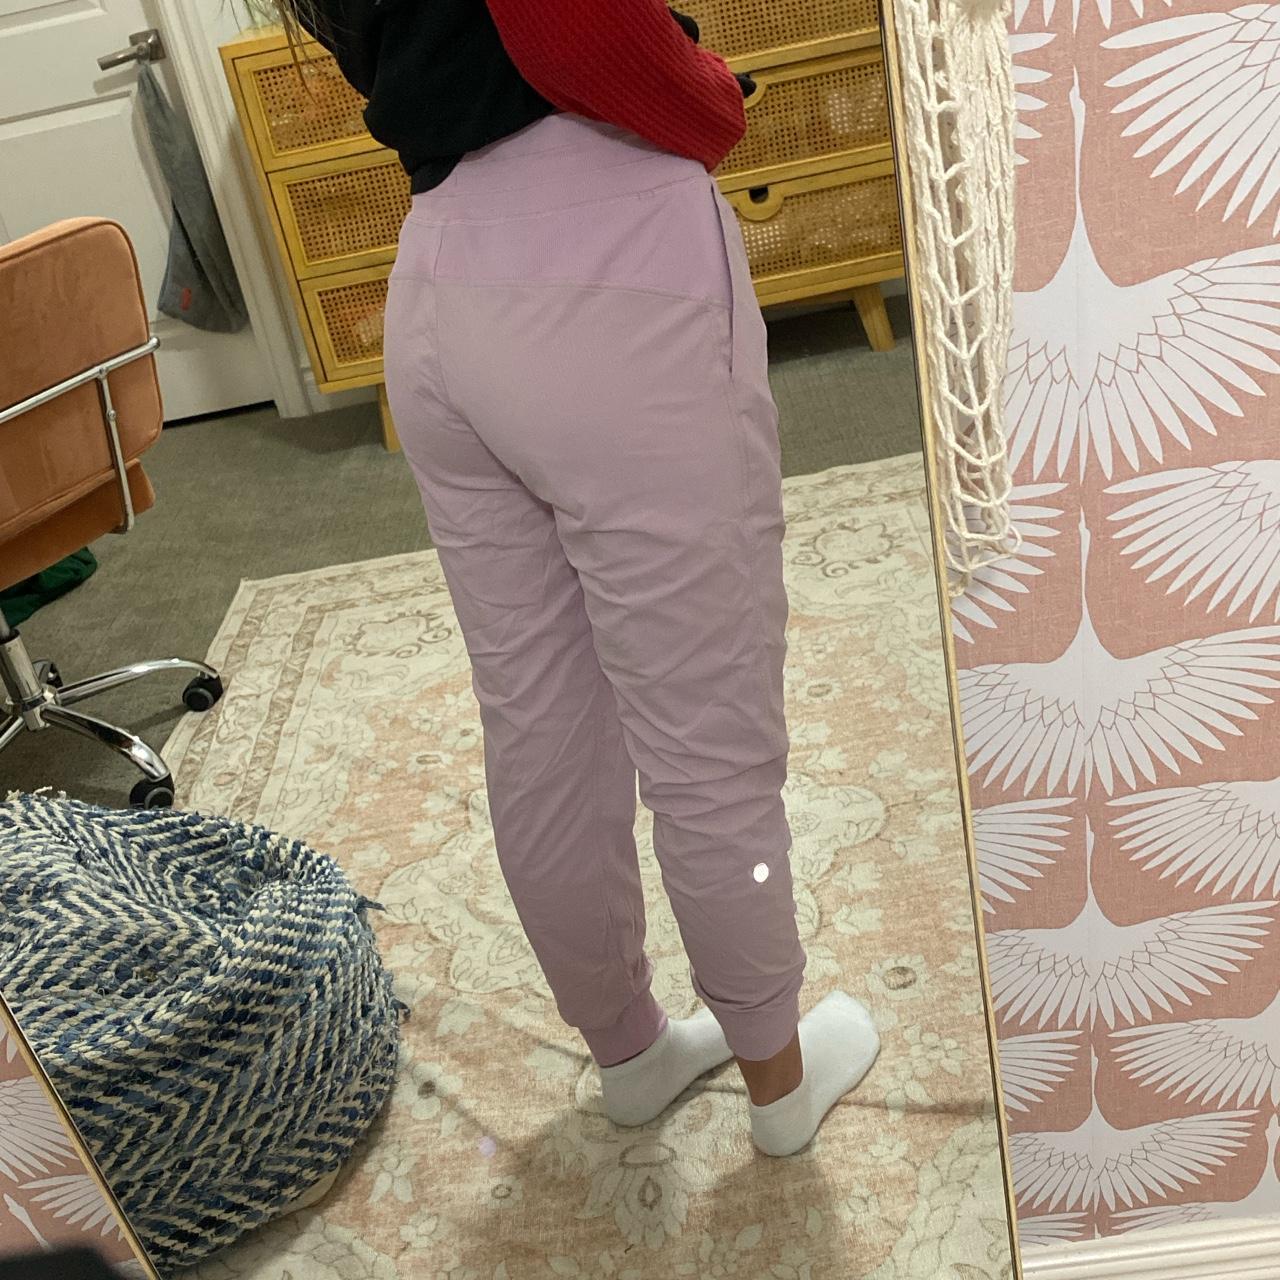 adapted state jogger outfit｜TikTok Search